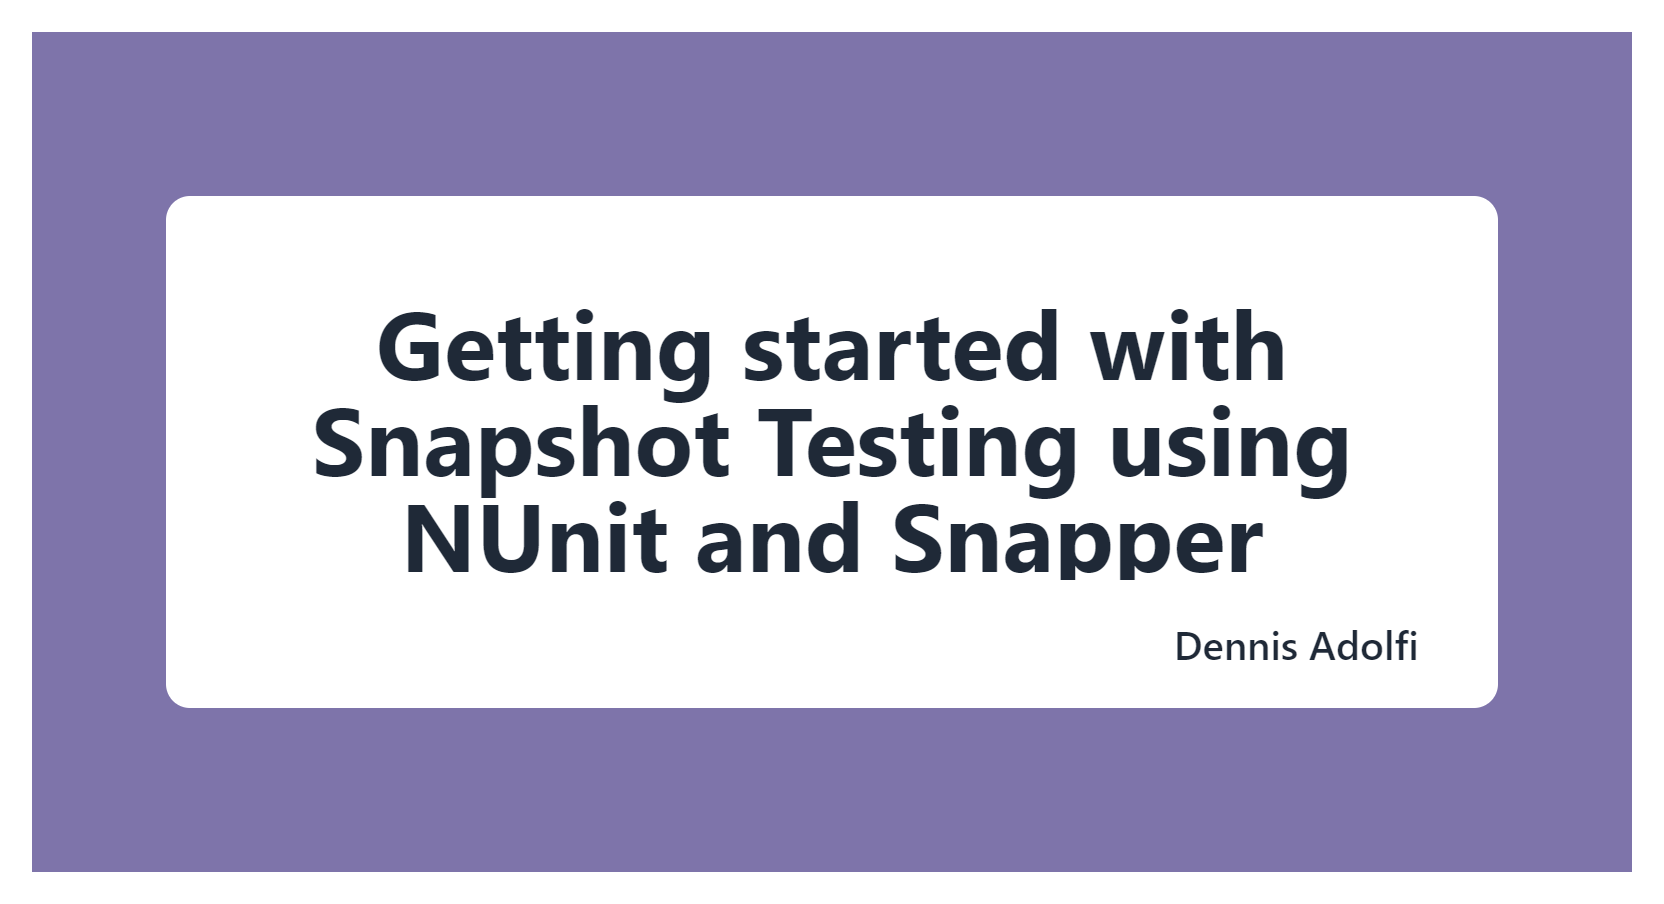 Getting started with Snapshot Testing using NUnit and Snapper